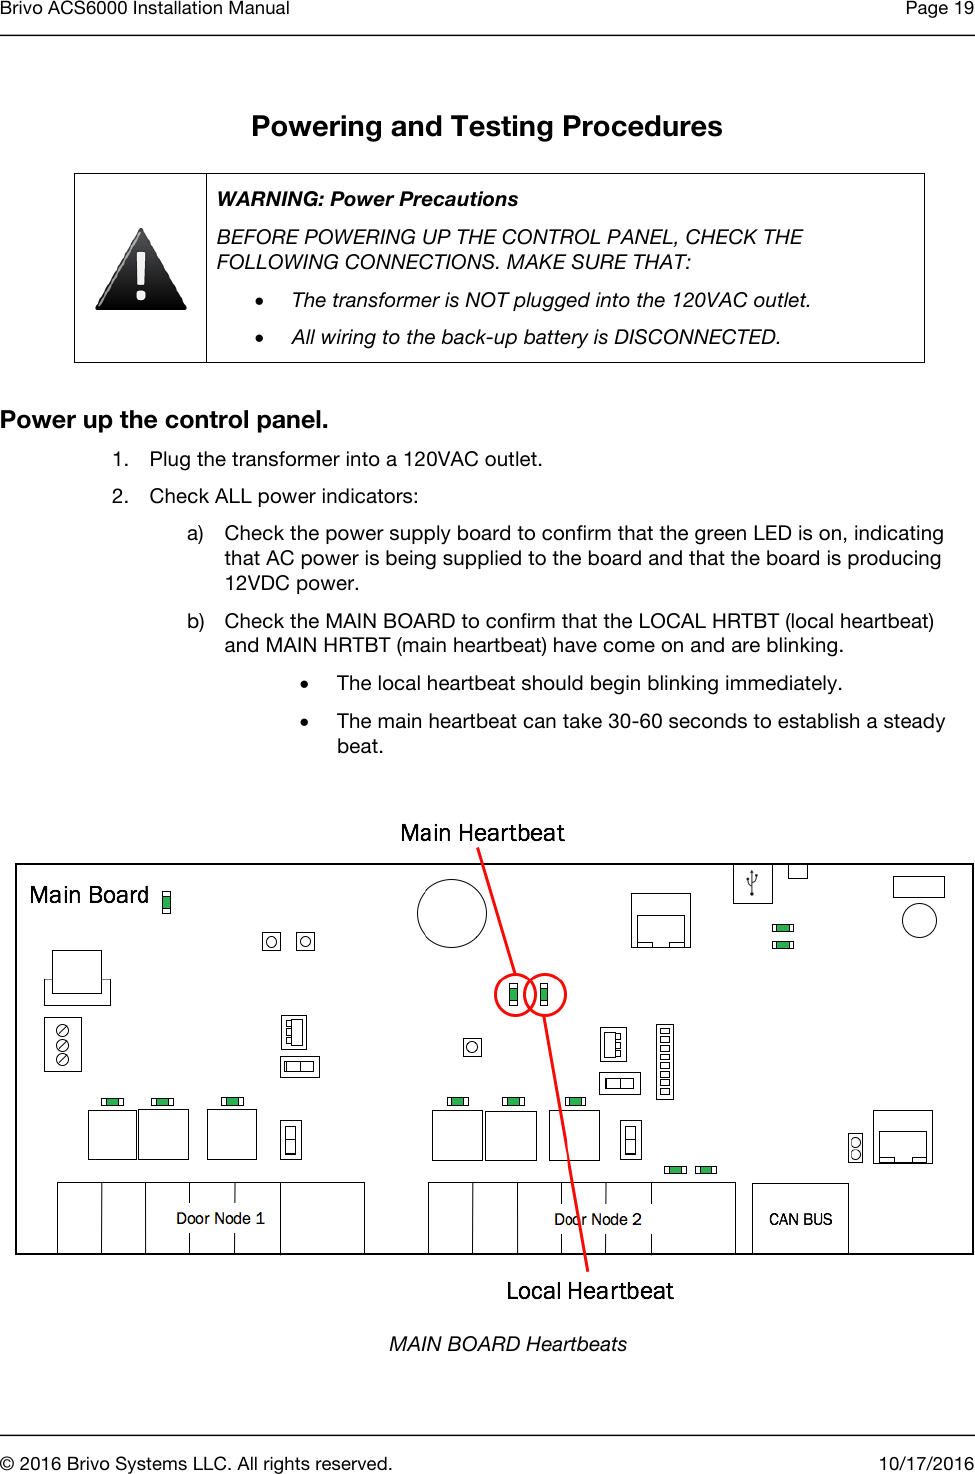 Brivo ACS6000 Installation Manual Page 19      © 2016 Brivo Systems LLC. All rights reserved. 10/17/2016  Powering and Testing Procedures  WARNING: Power Precautions BEFORE POWERING UP THE CONTROL PANEL, CHECK THE FOLLOWING CONNECTIONS. MAKE SURE THAT: • The transformer is NOT plugged into the 120VAC outlet. • All wiring to the back-up battery is DISCONNECTED.  Power up the control panel. 1. Plug the transformer into a 120VAC outlet. 2. Check ALL power indicators: a) Check the power supply board to confirm that the green LED is on, indicating that AC power is being supplied to the board and that the board is producing 12VDC power. b) Check the MAIN BOARD to confirm that the LOCAL HRTBT (local heartbeat) and MAIN HRTBT (main heartbeat) have come on and are blinking.  • The local heartbeat should begin blinking immediately. • The main heartbeat can take 30-60 seconds to establish a steady beat.    MAIN BOARD Heartbeats 